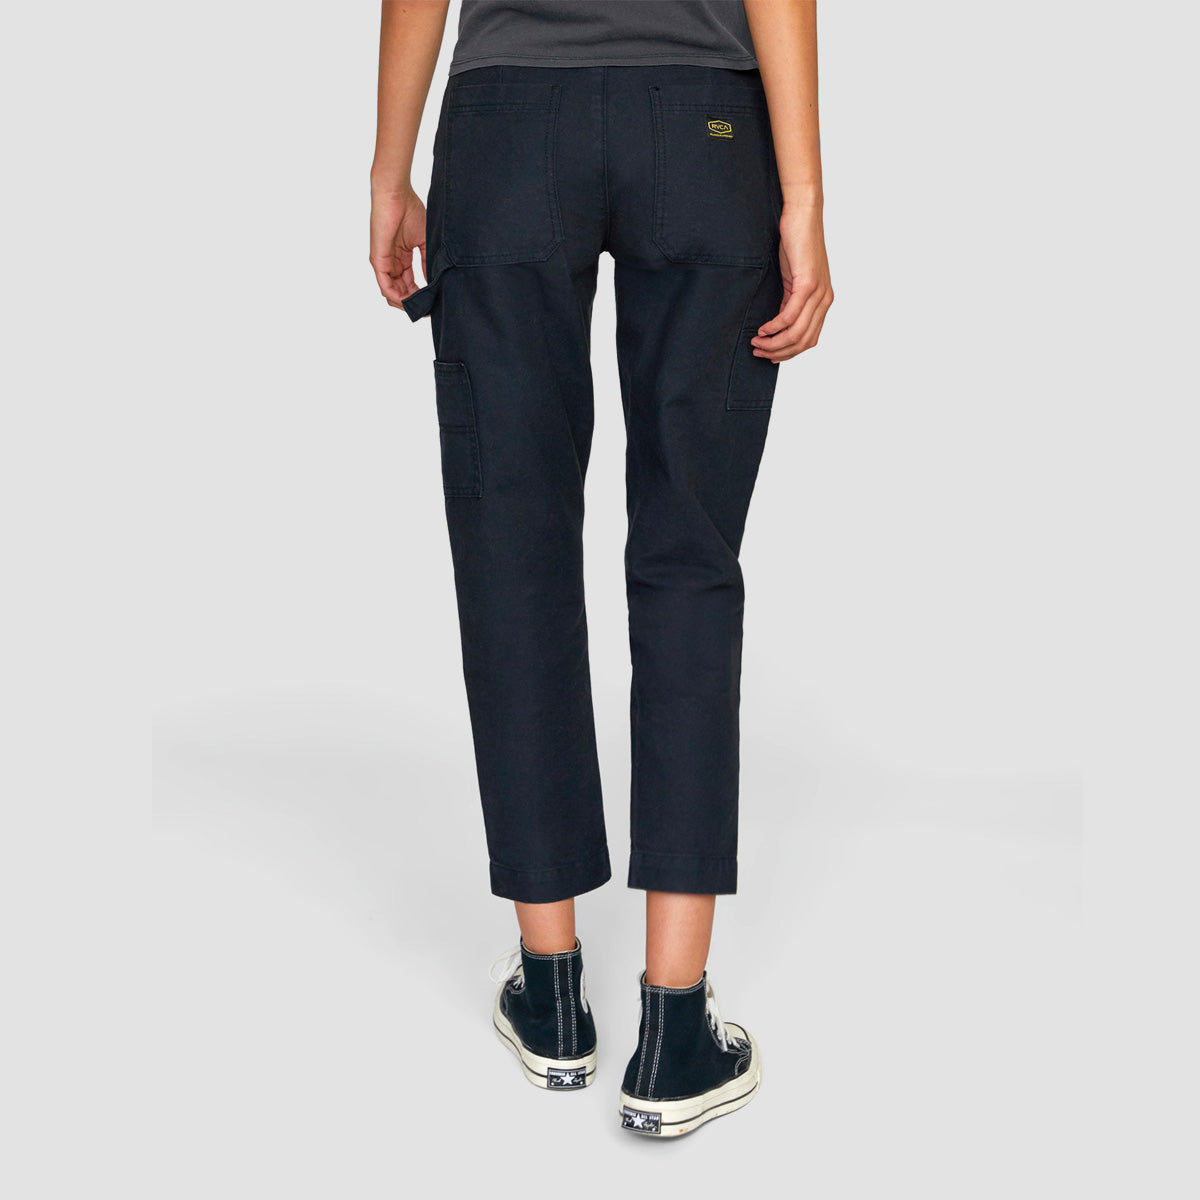 RVCA Recession Collection Slim Fit Trousers True Black - Womens